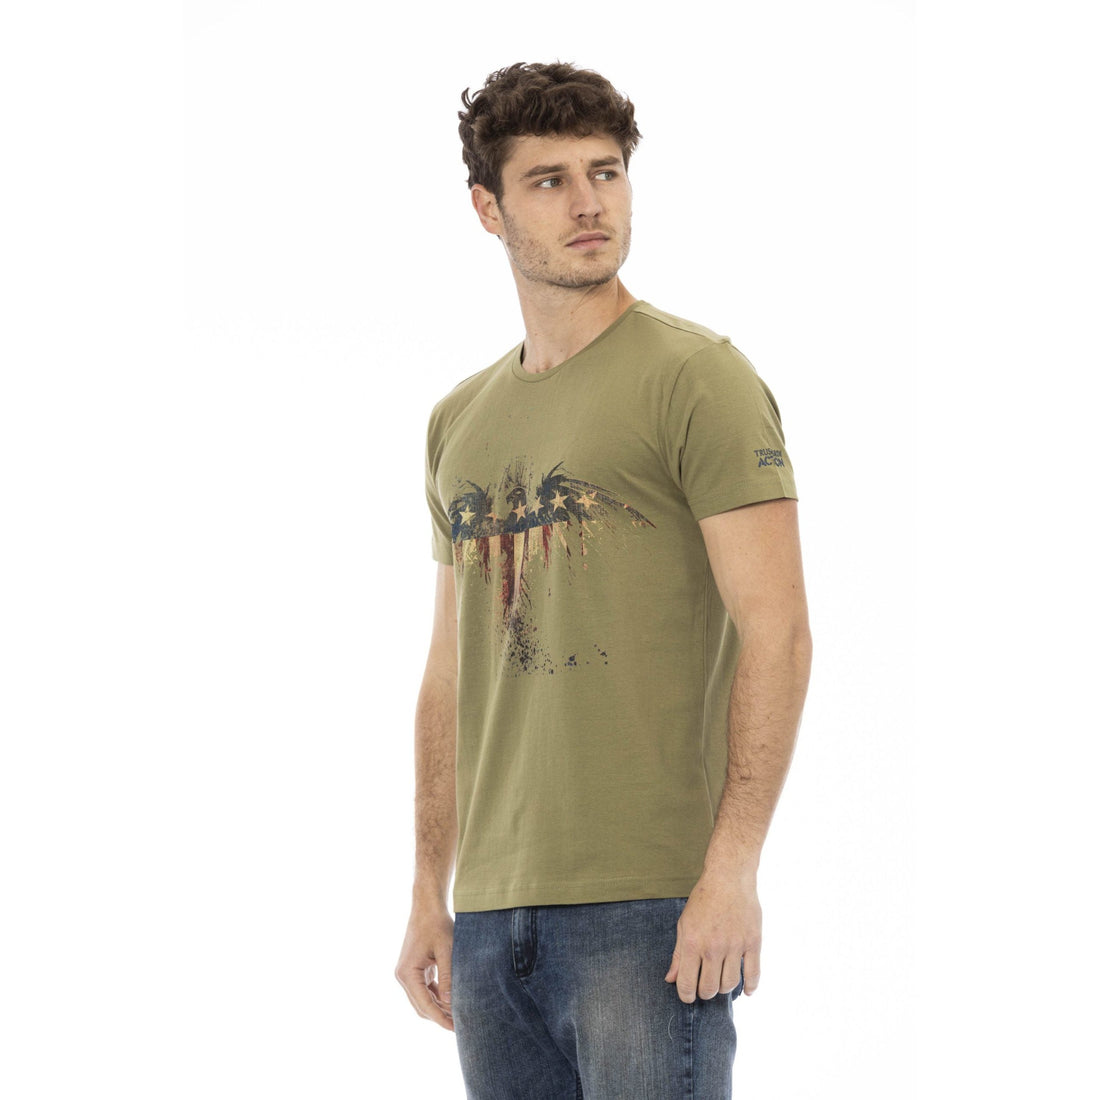 Trussardi Action Elegant Green Tee with Artistic Front Print